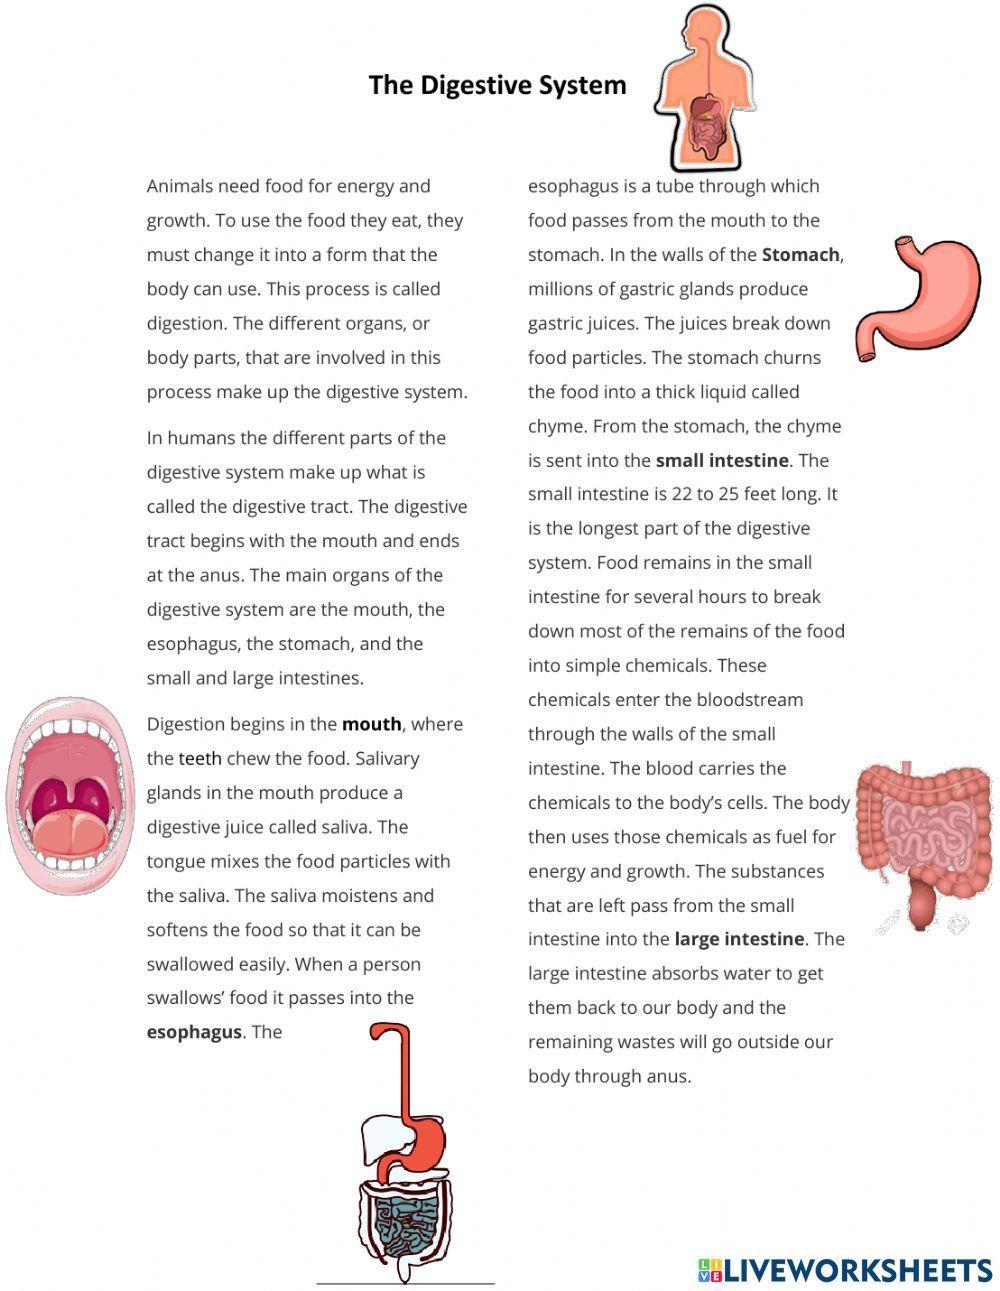 Digestive System Article